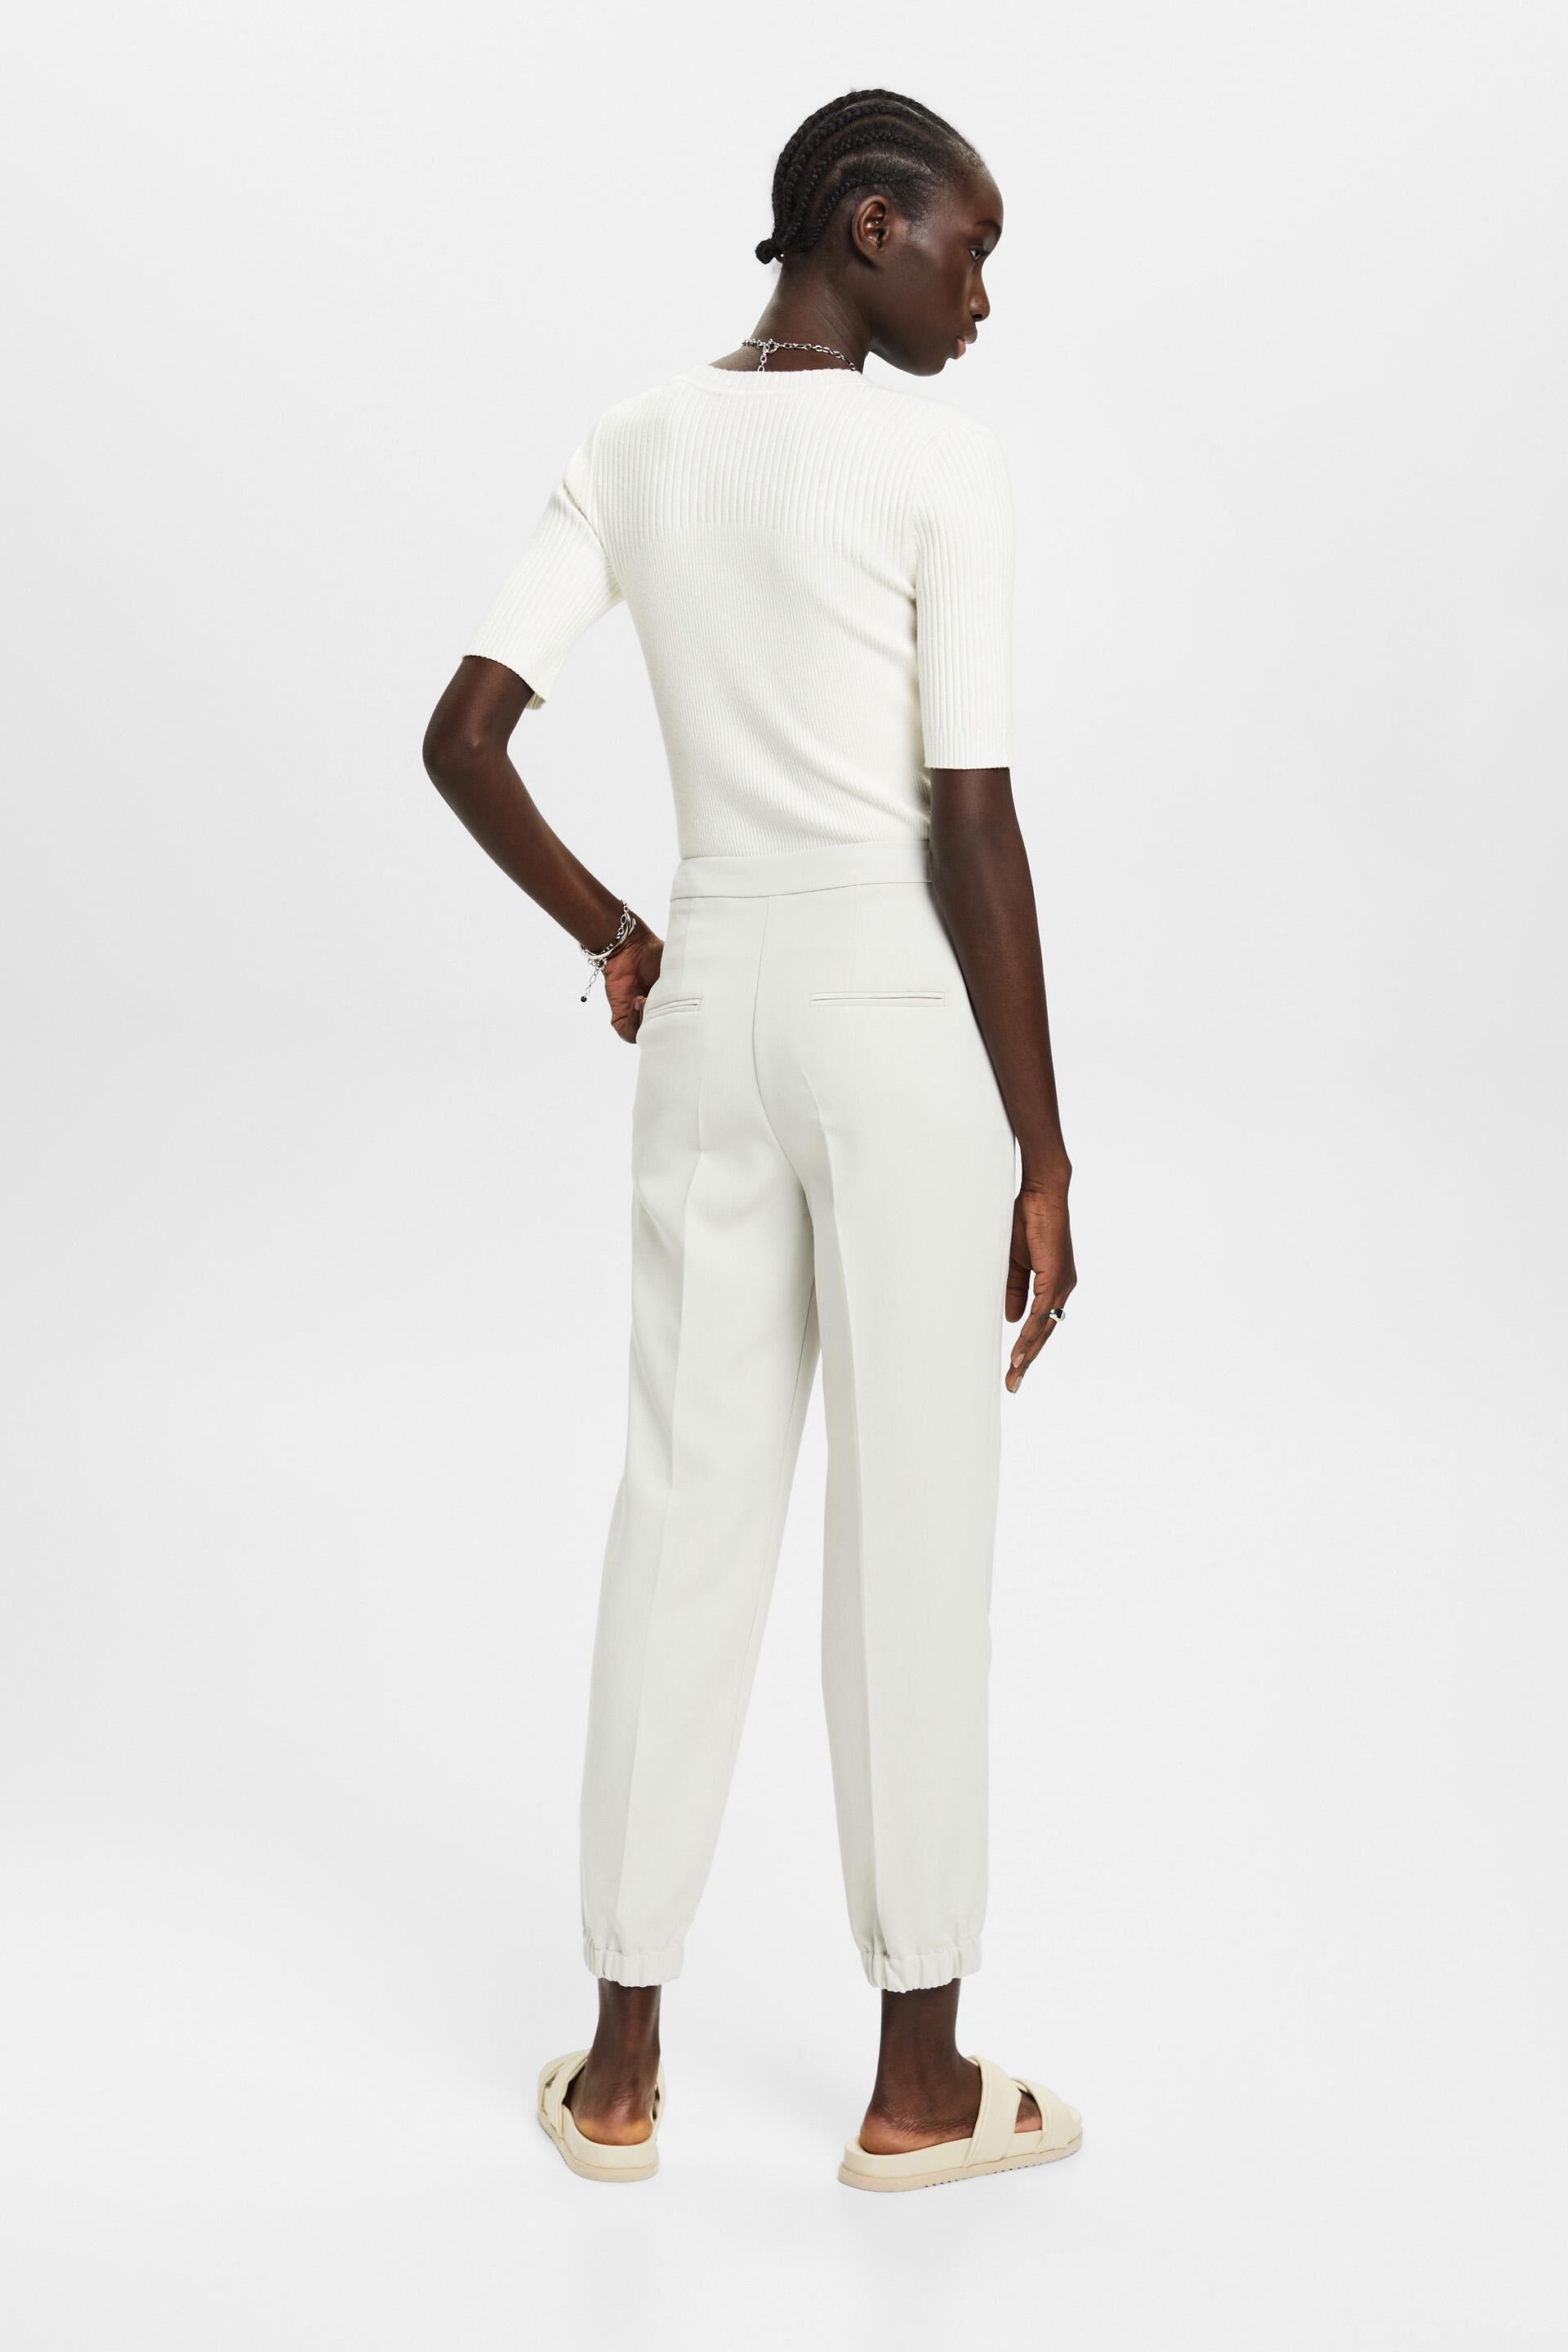 Buy Cream Trousers & Pants for Women by Marks & Spencer Online | Ajio.com